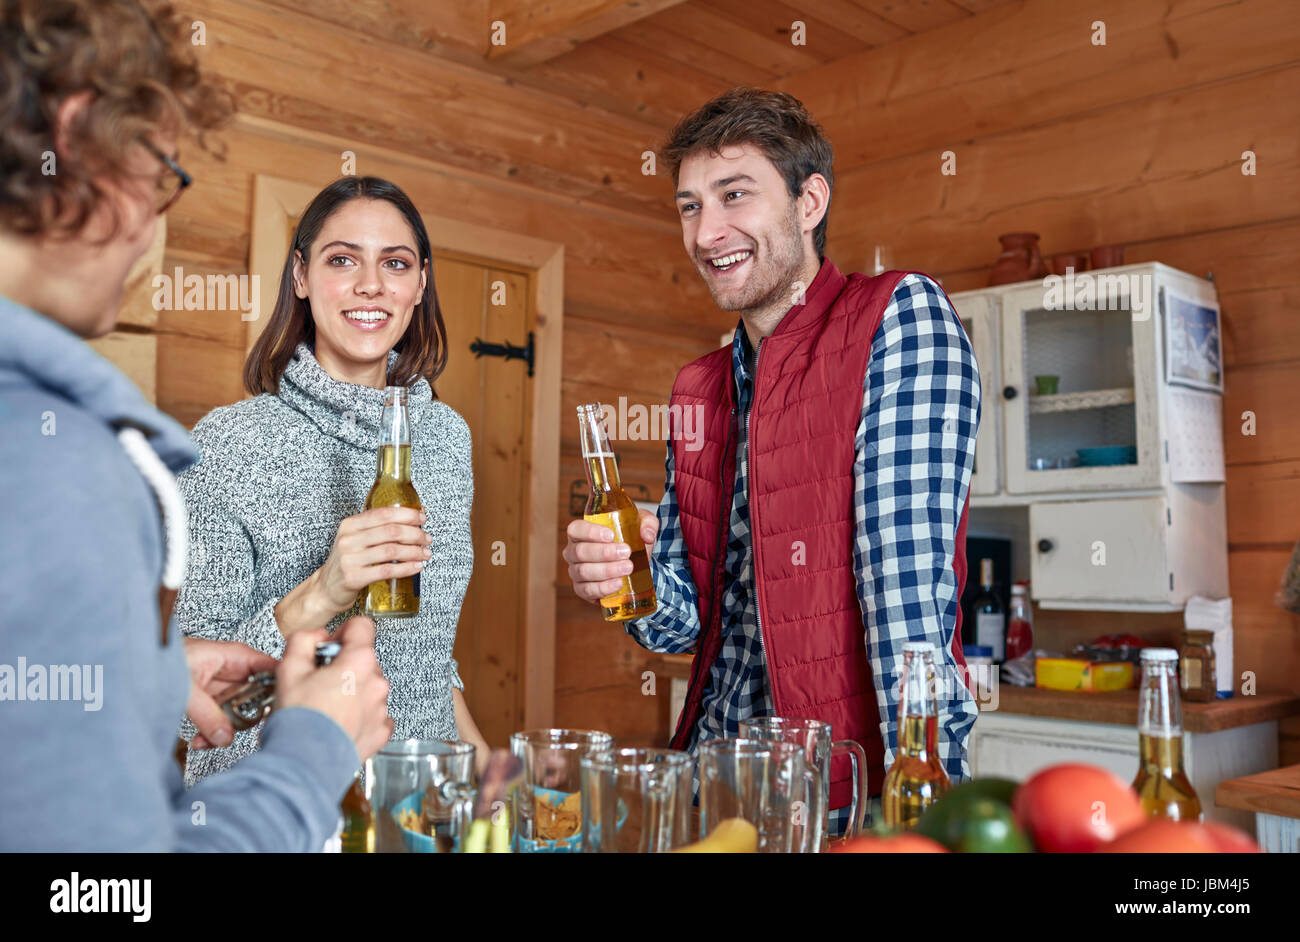 Friends drinking beer and hanging out in cabin kitchen Stock Photo